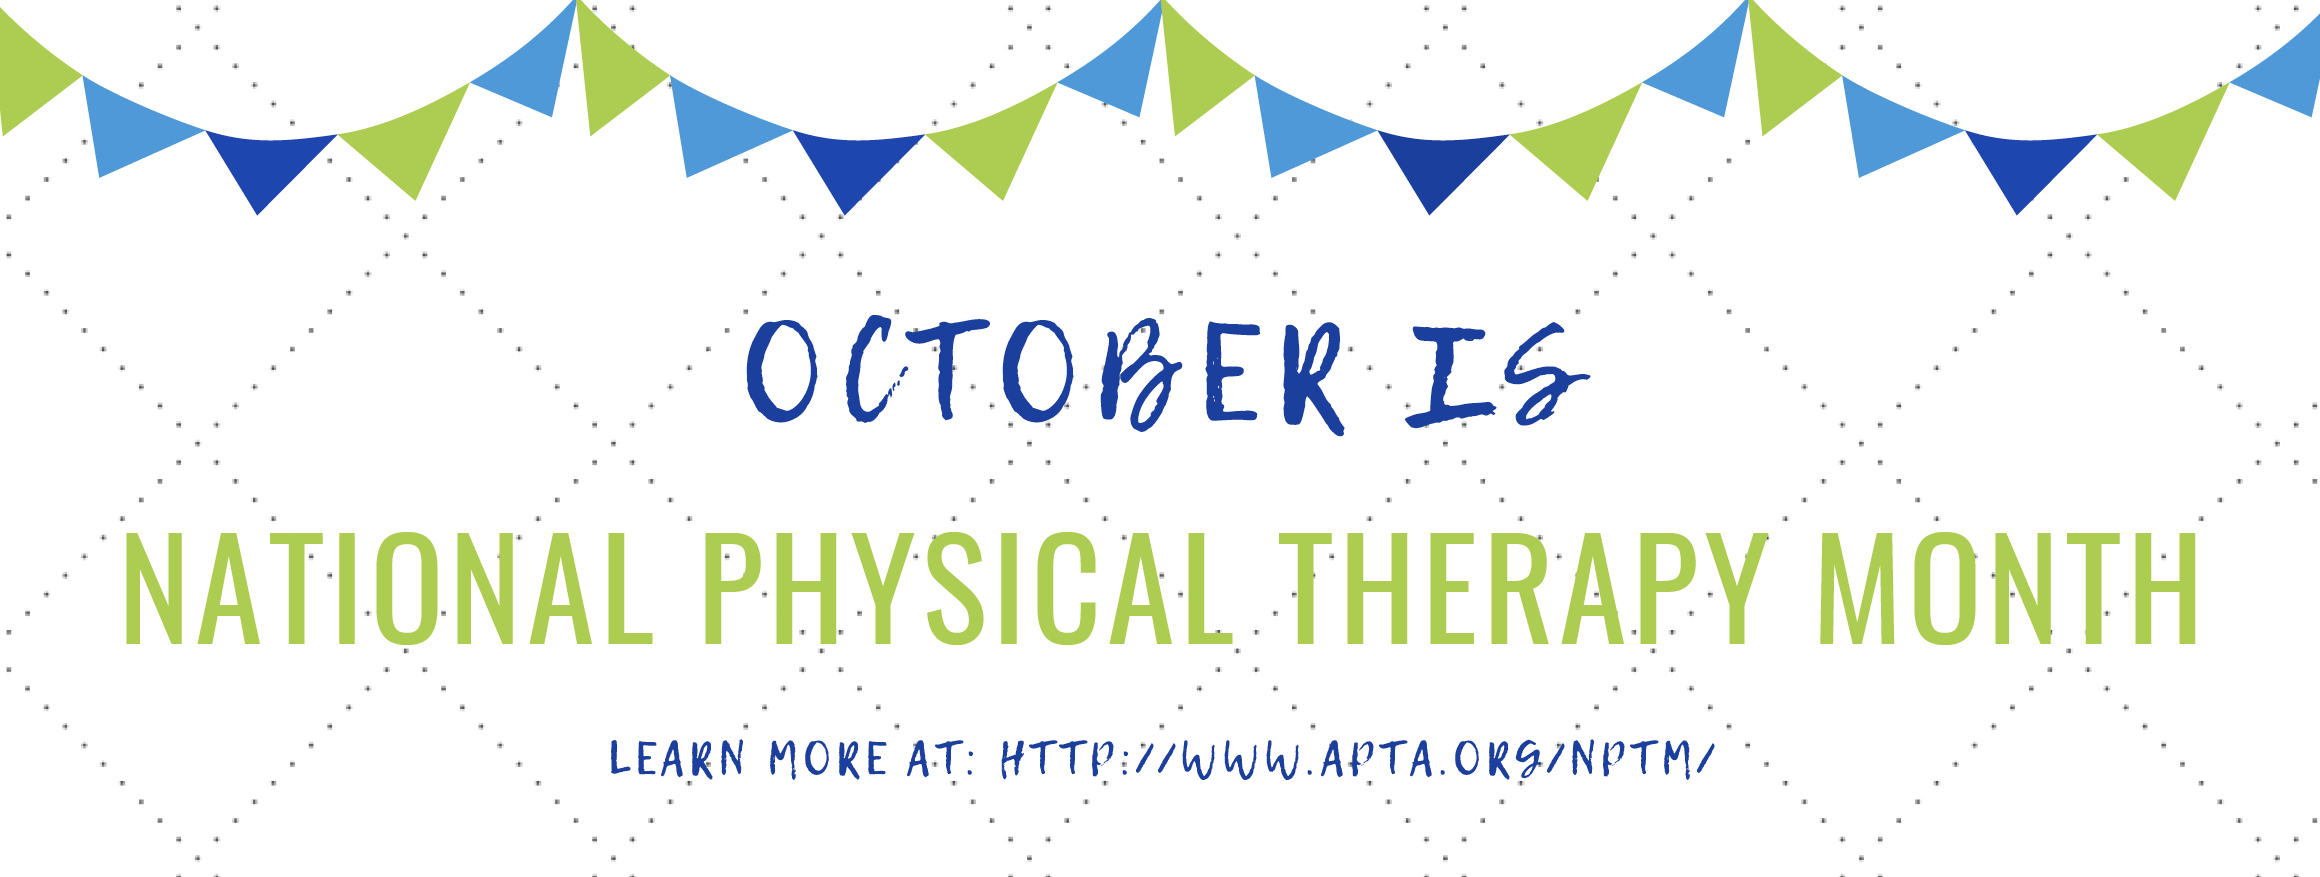 National Physical Therapy Month Logo - National Physical Therapy Month. Best Physical & Orthopedic Therapy